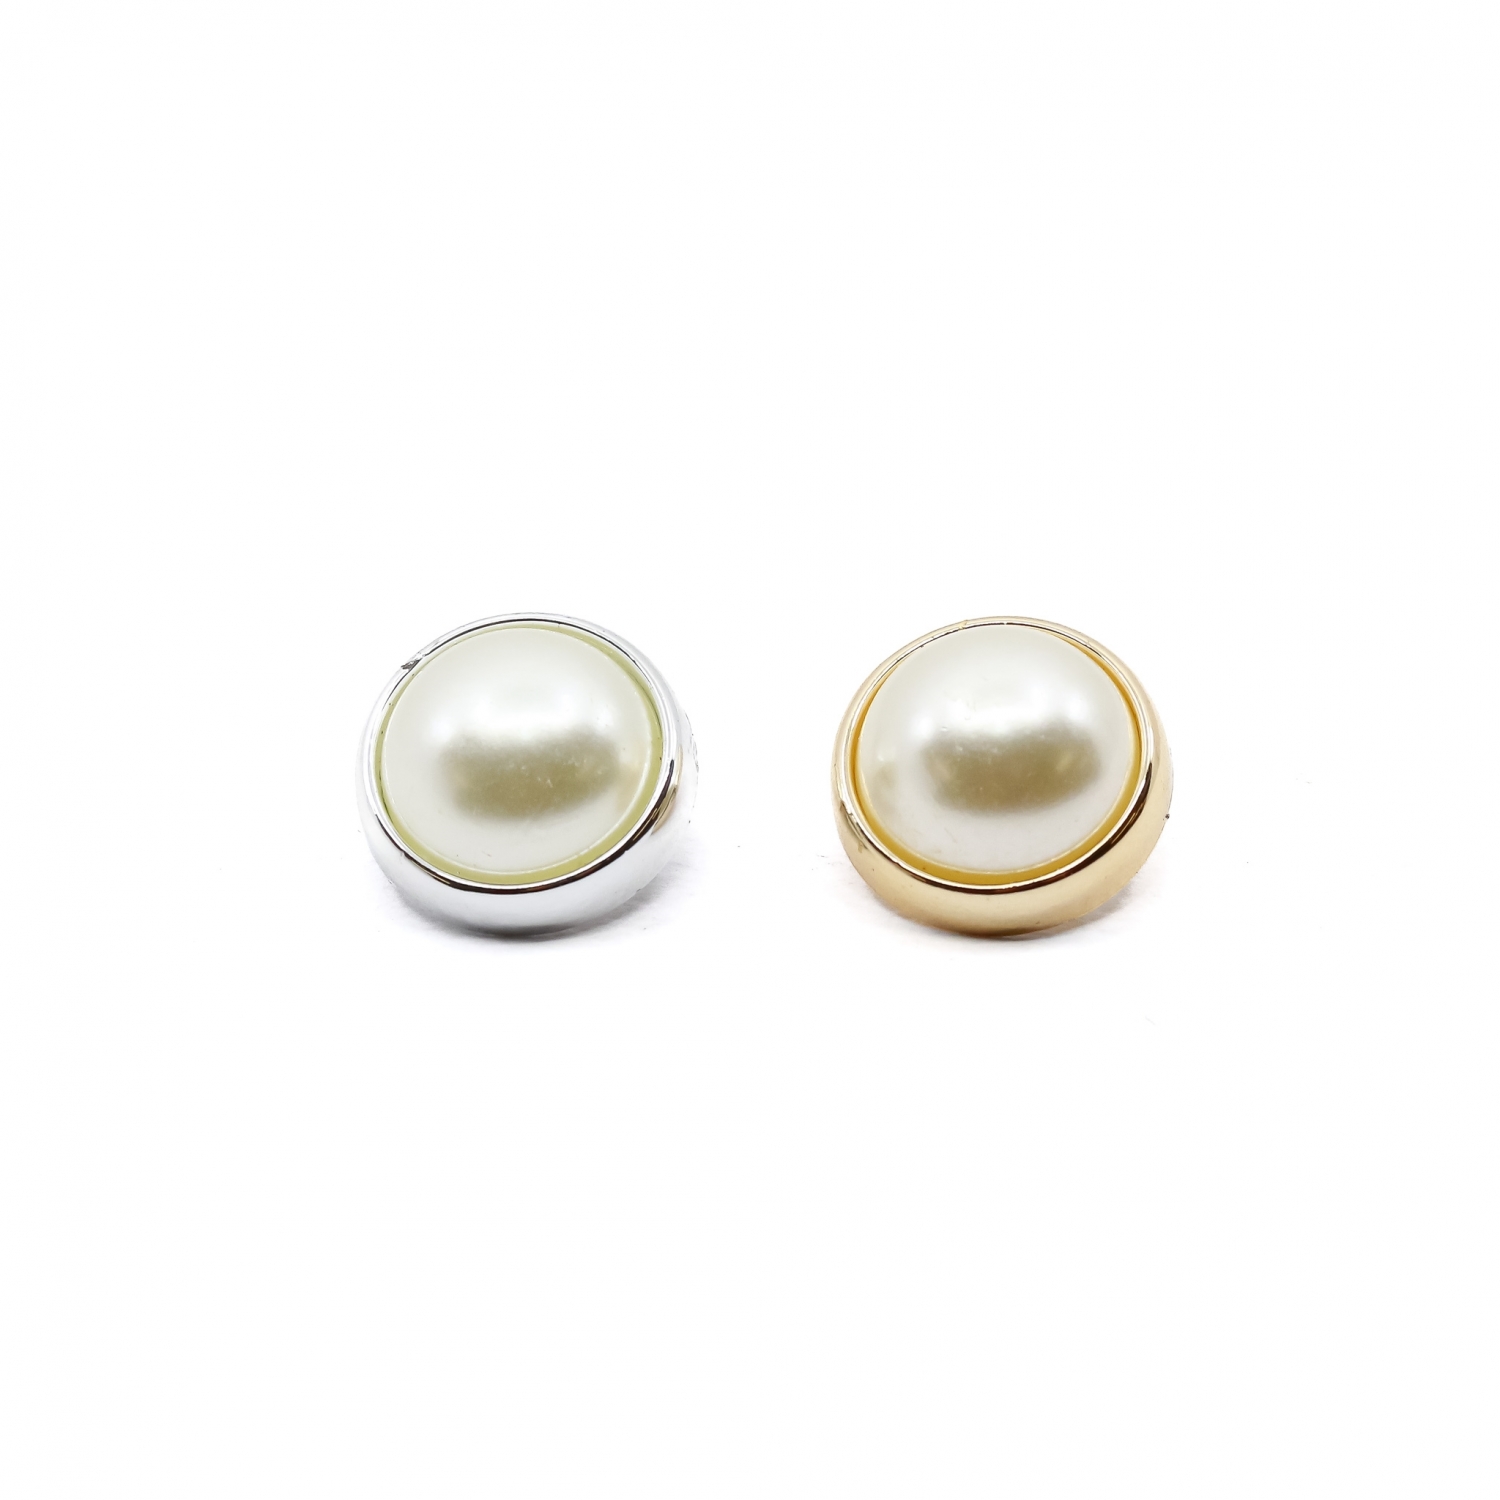 Pearl Shank Buttons, 25 mm (50 pcs/pack) Code: 6311/40